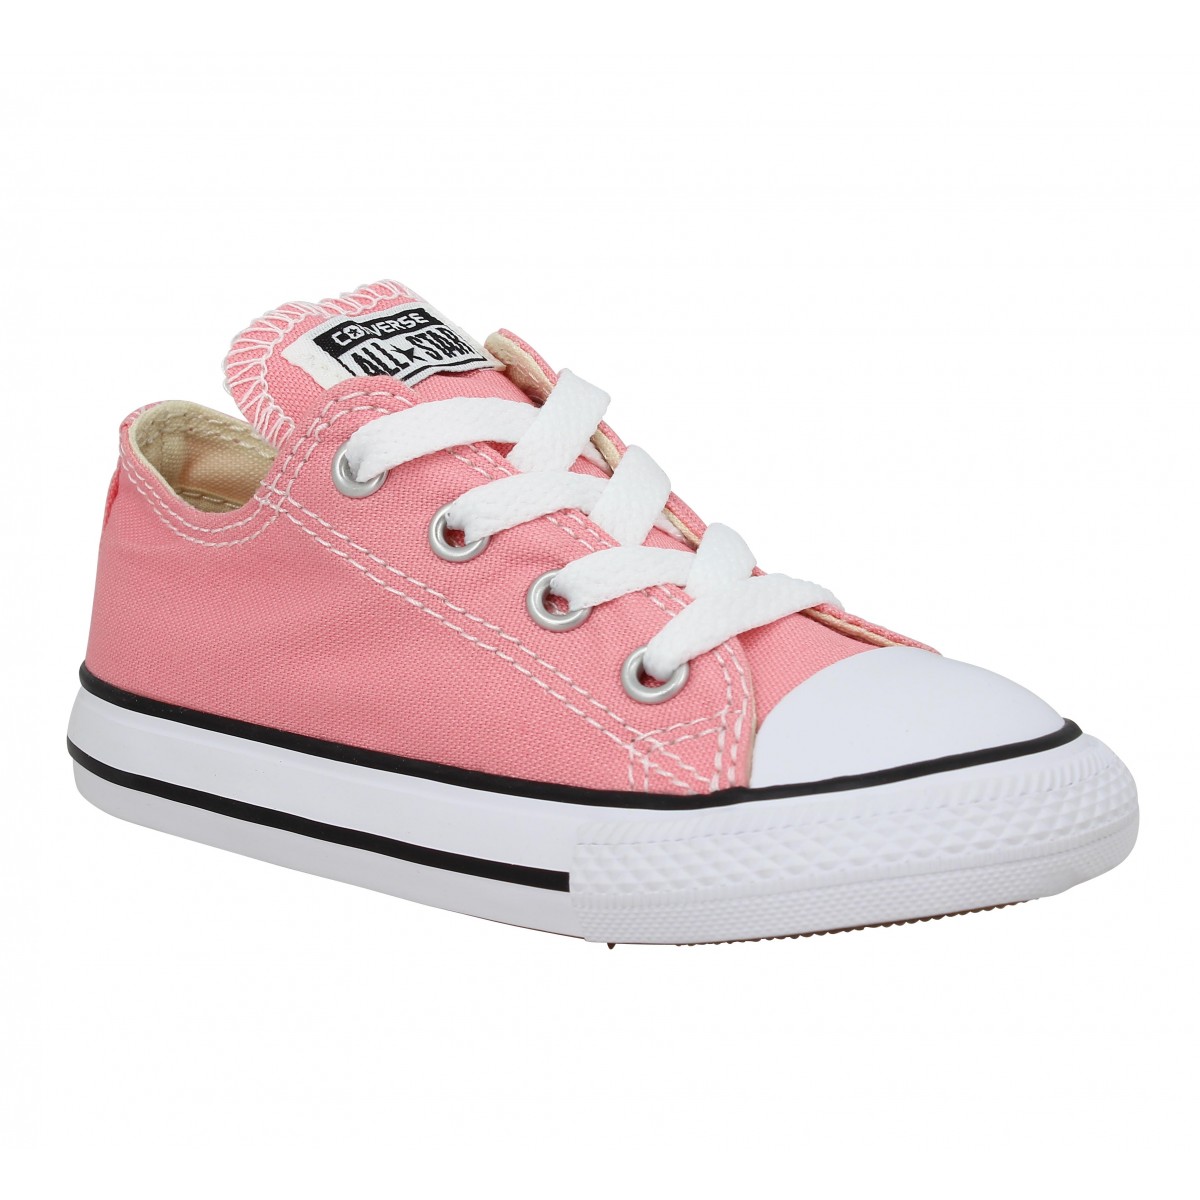 Baskets CONVERSE Chuck Taylor All Star toile Enfant Pink